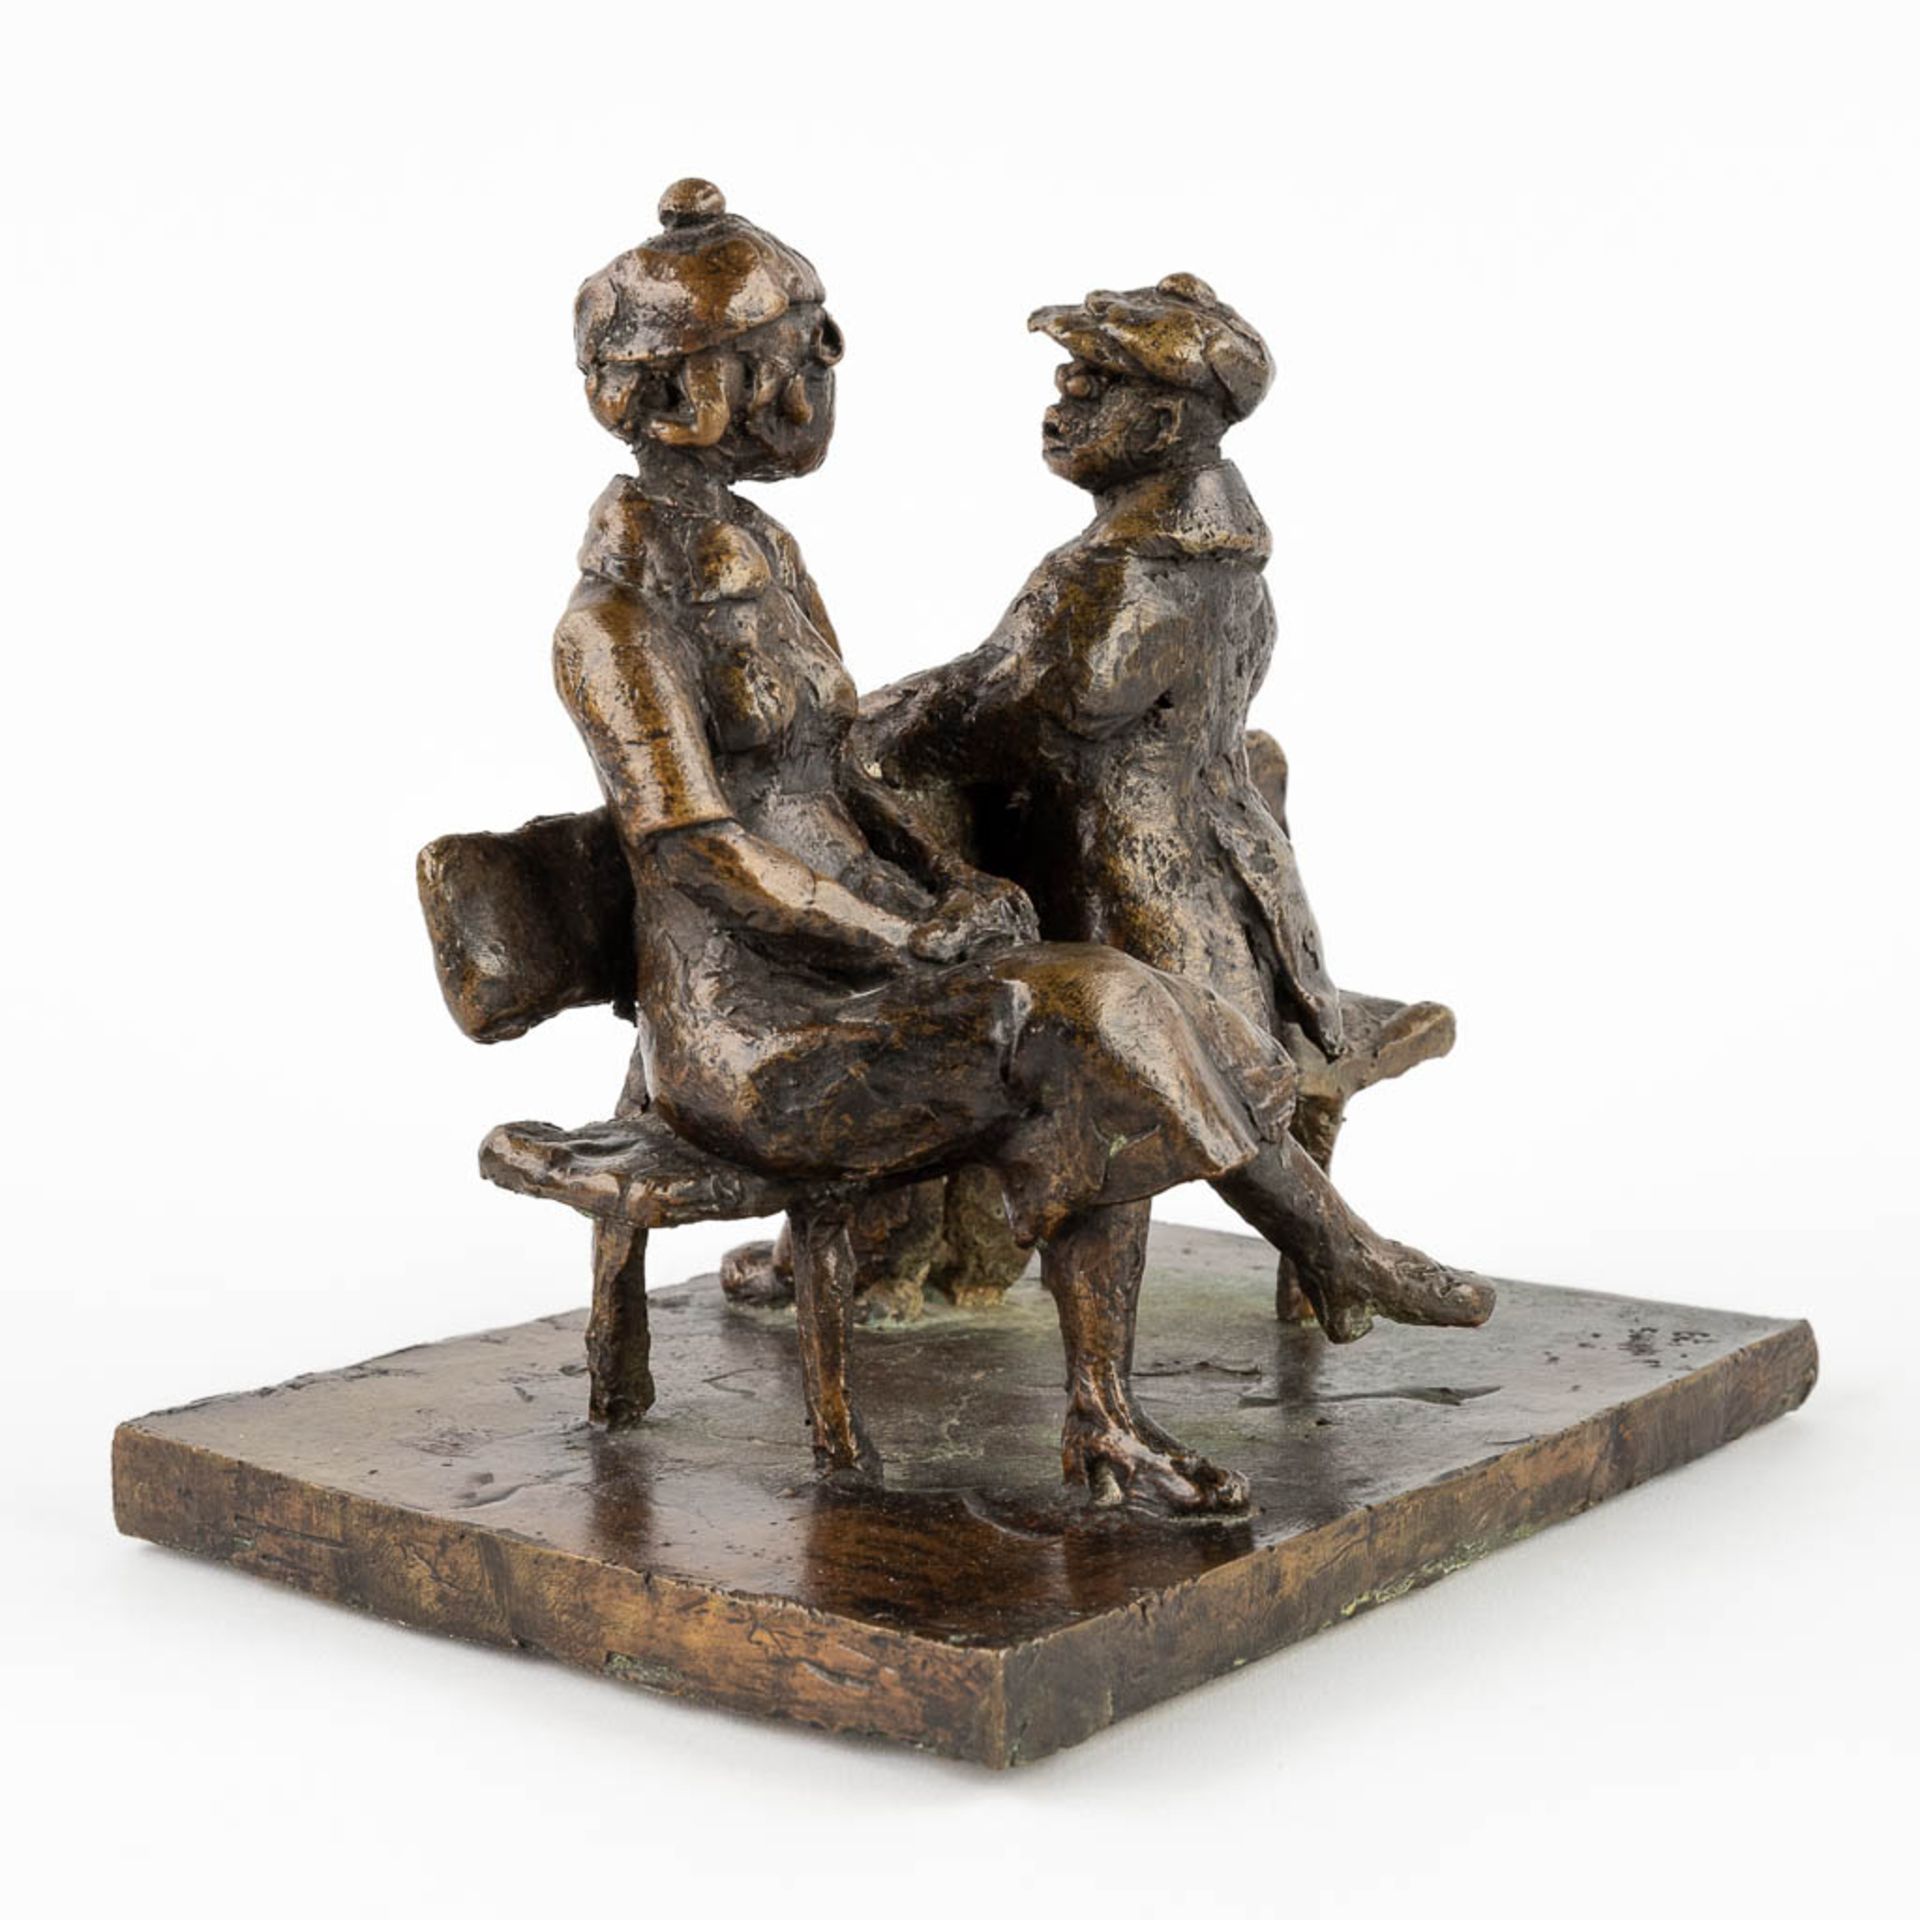 Jos WILMS (1930) 'The Bench' patinated bronze. (19)79. (D:18 x W:22 x H:20 cm) - Image 4 of 14